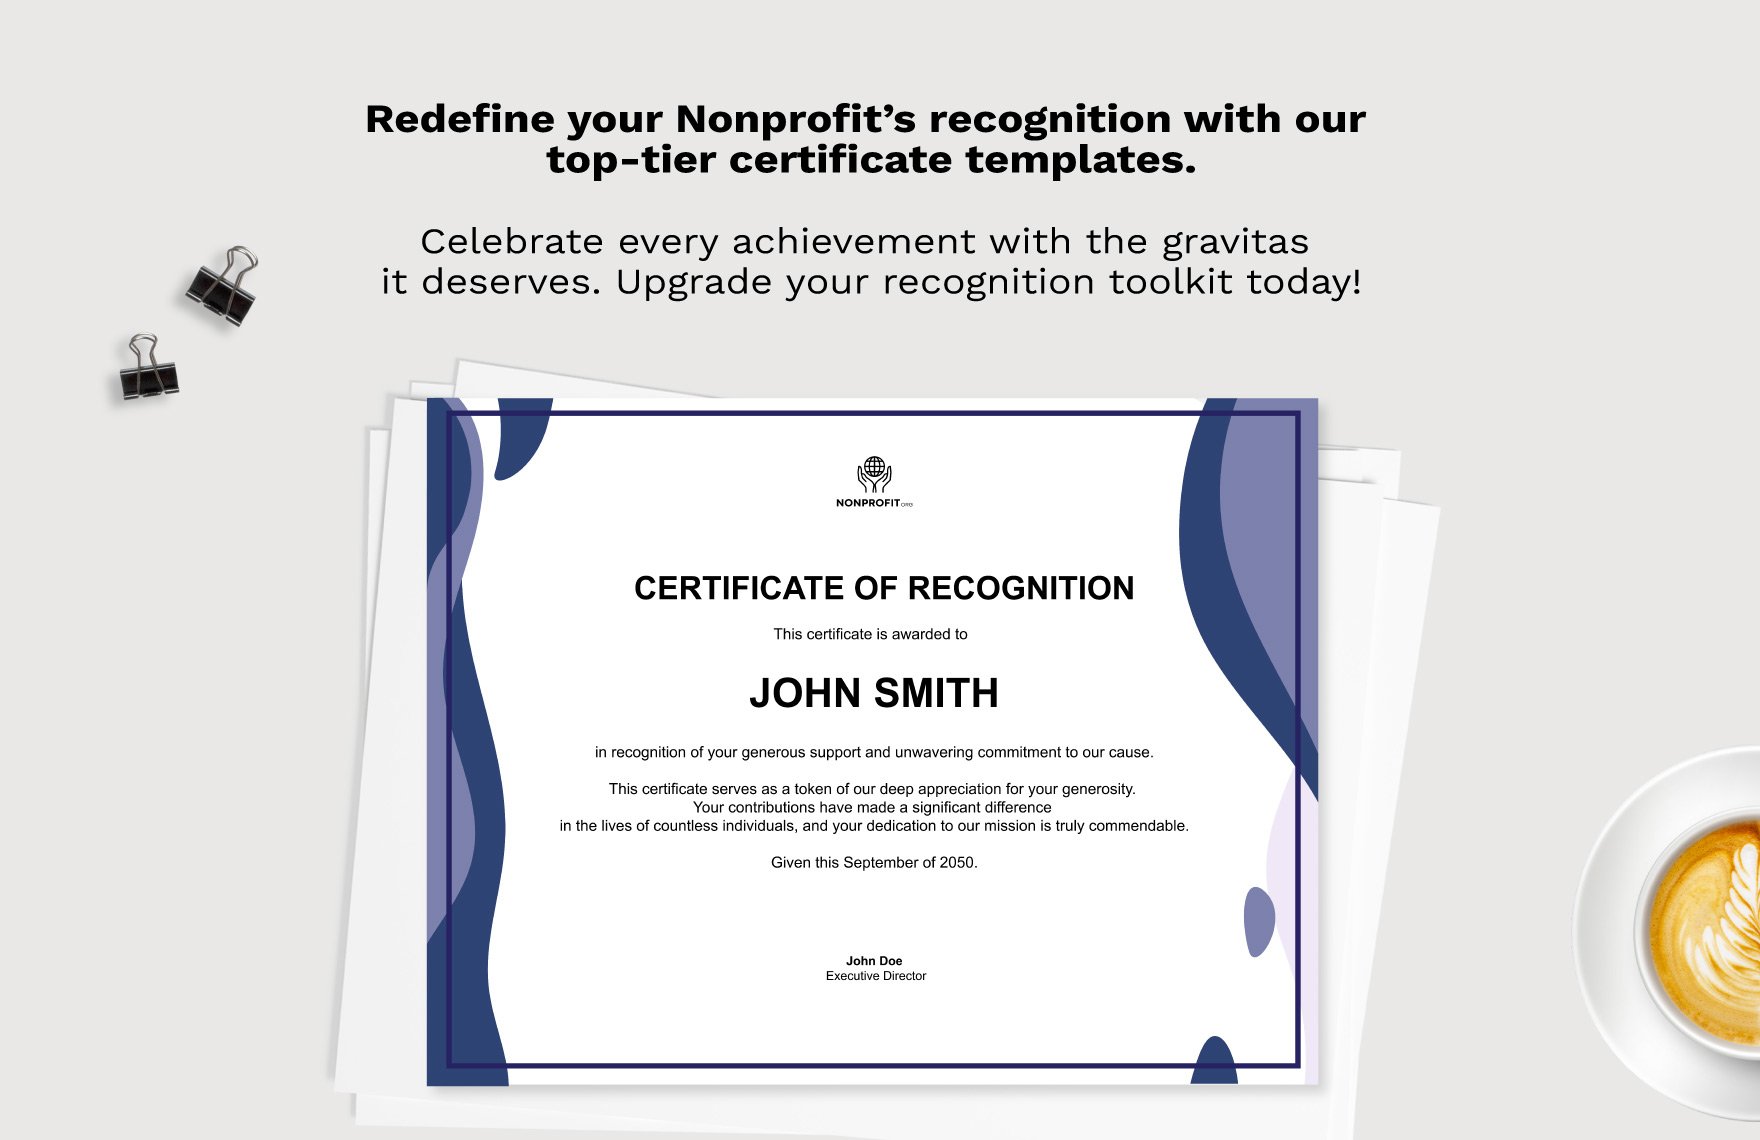 Nonprofit Organization Donor Recognition Certificate Template